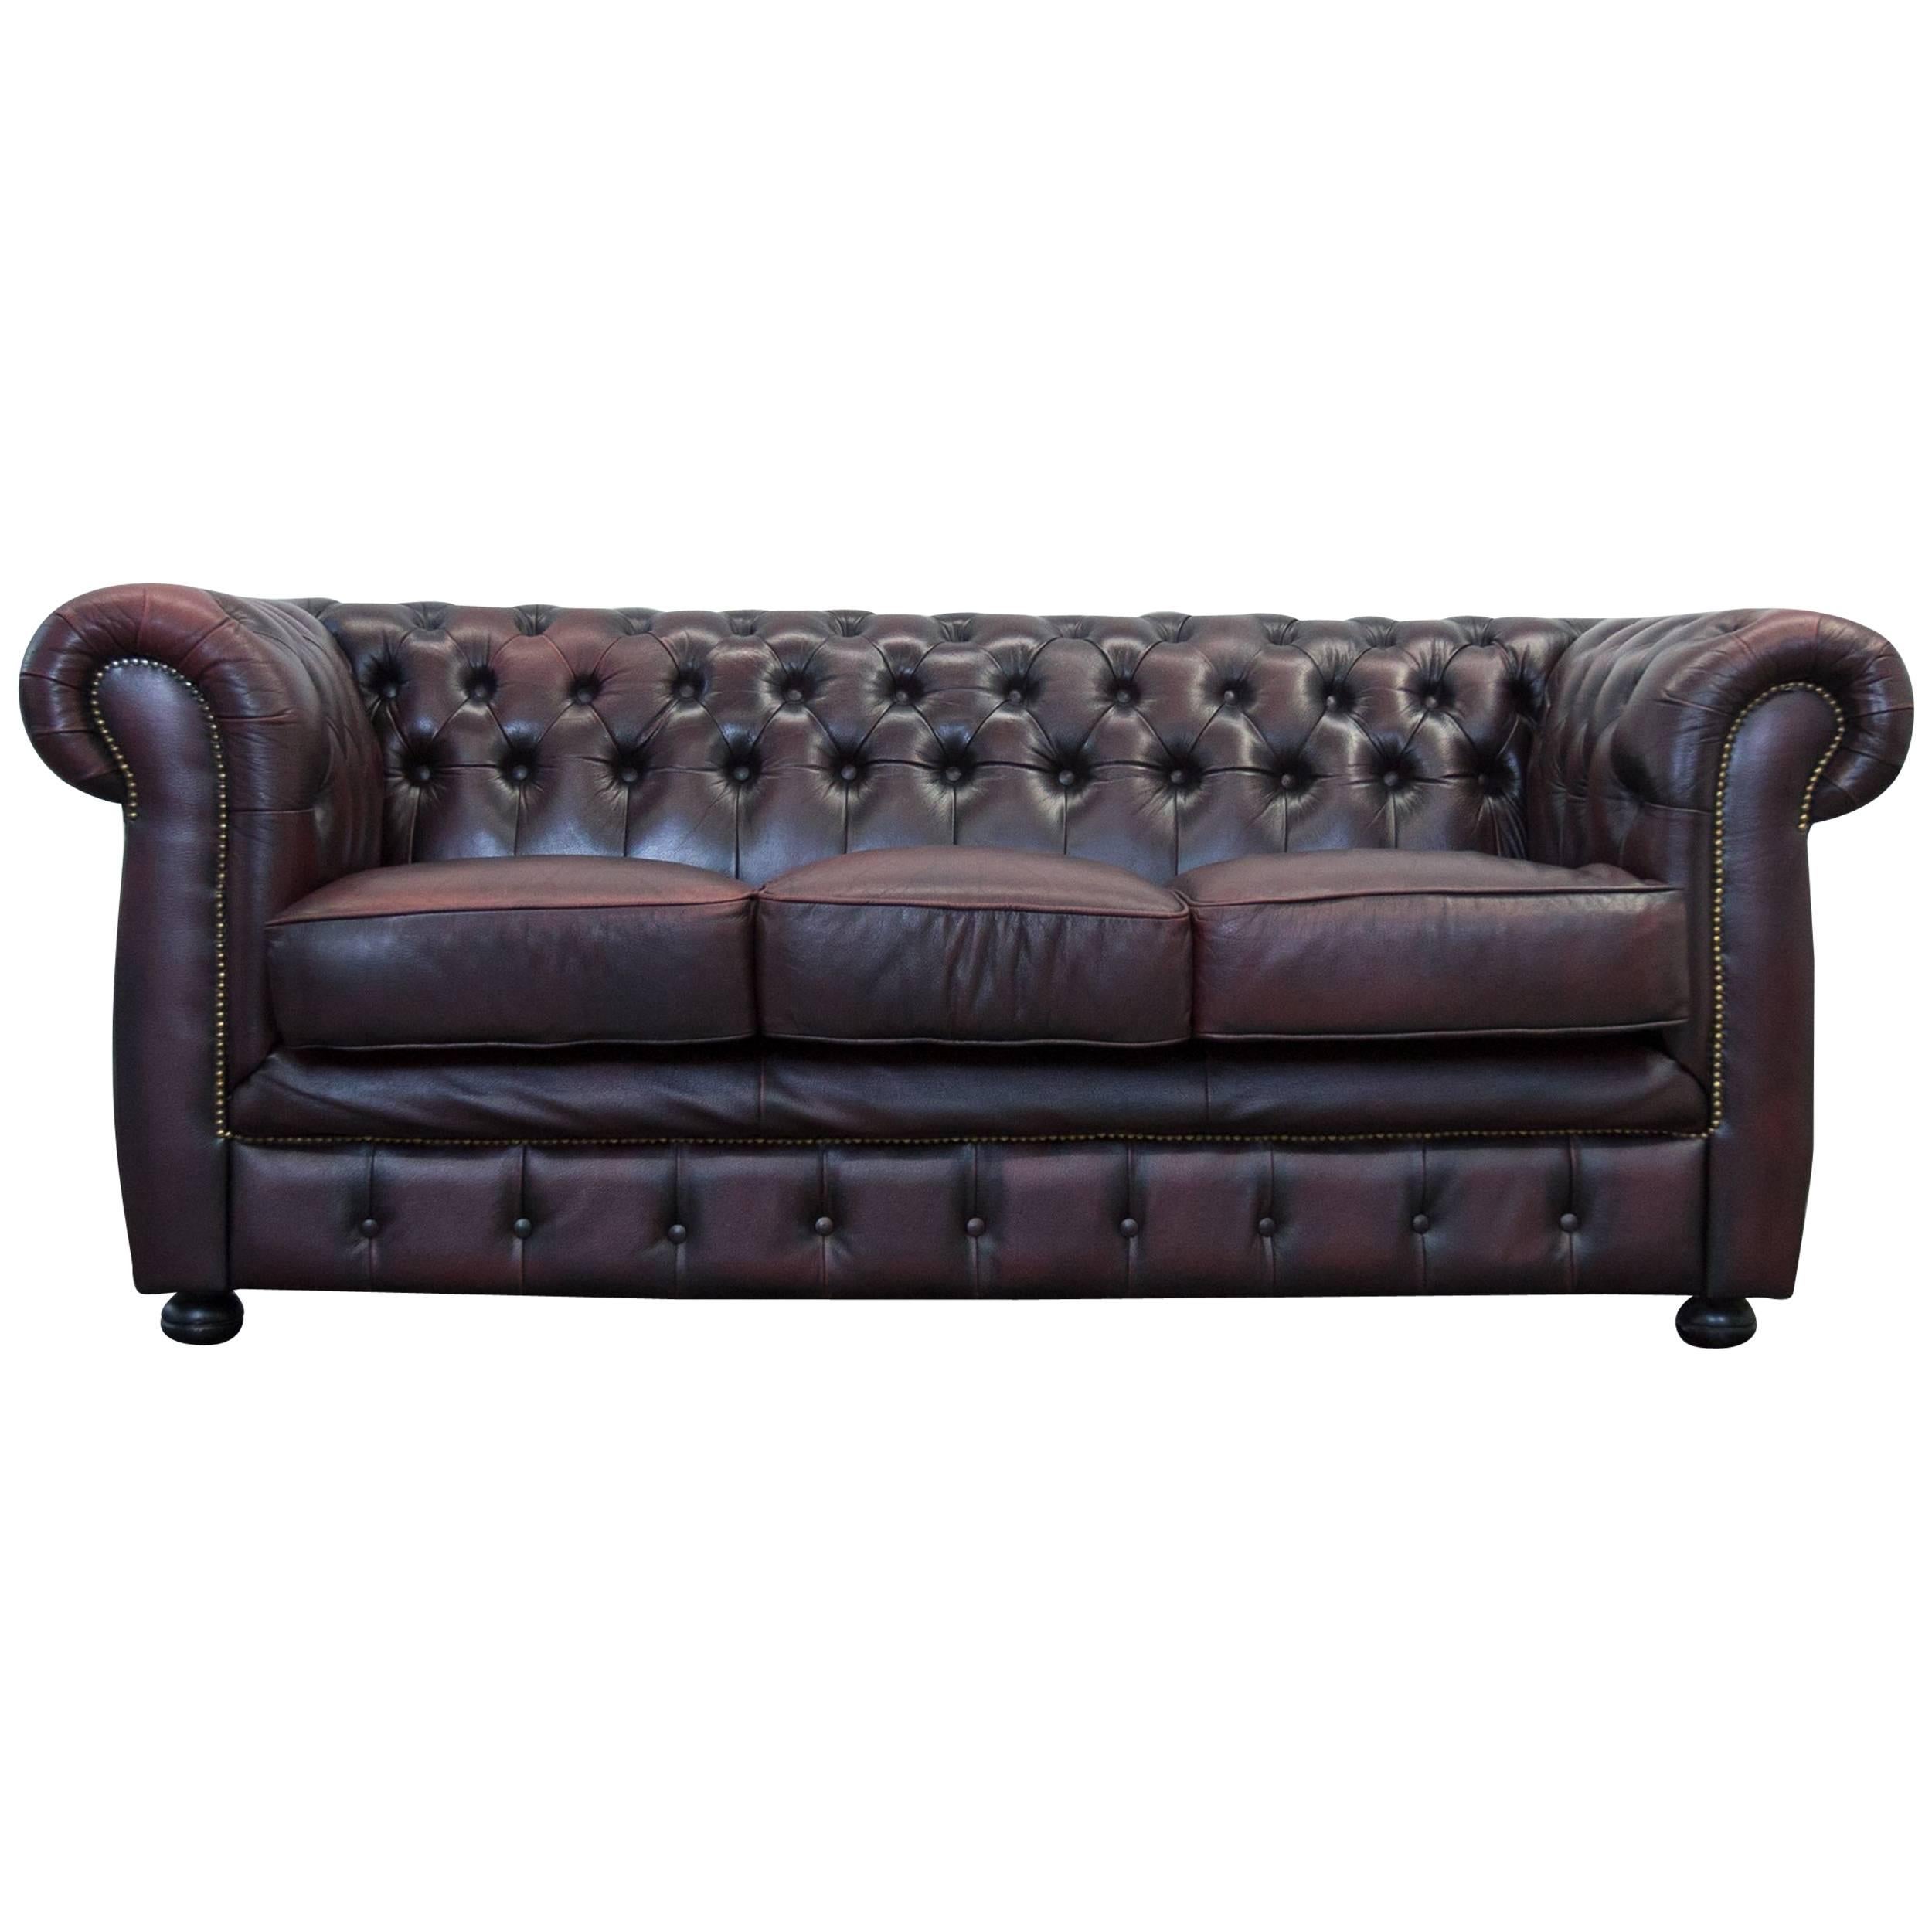 Red Leather Chesterfield Three-Seat Sofa by Möbel Art For Sale